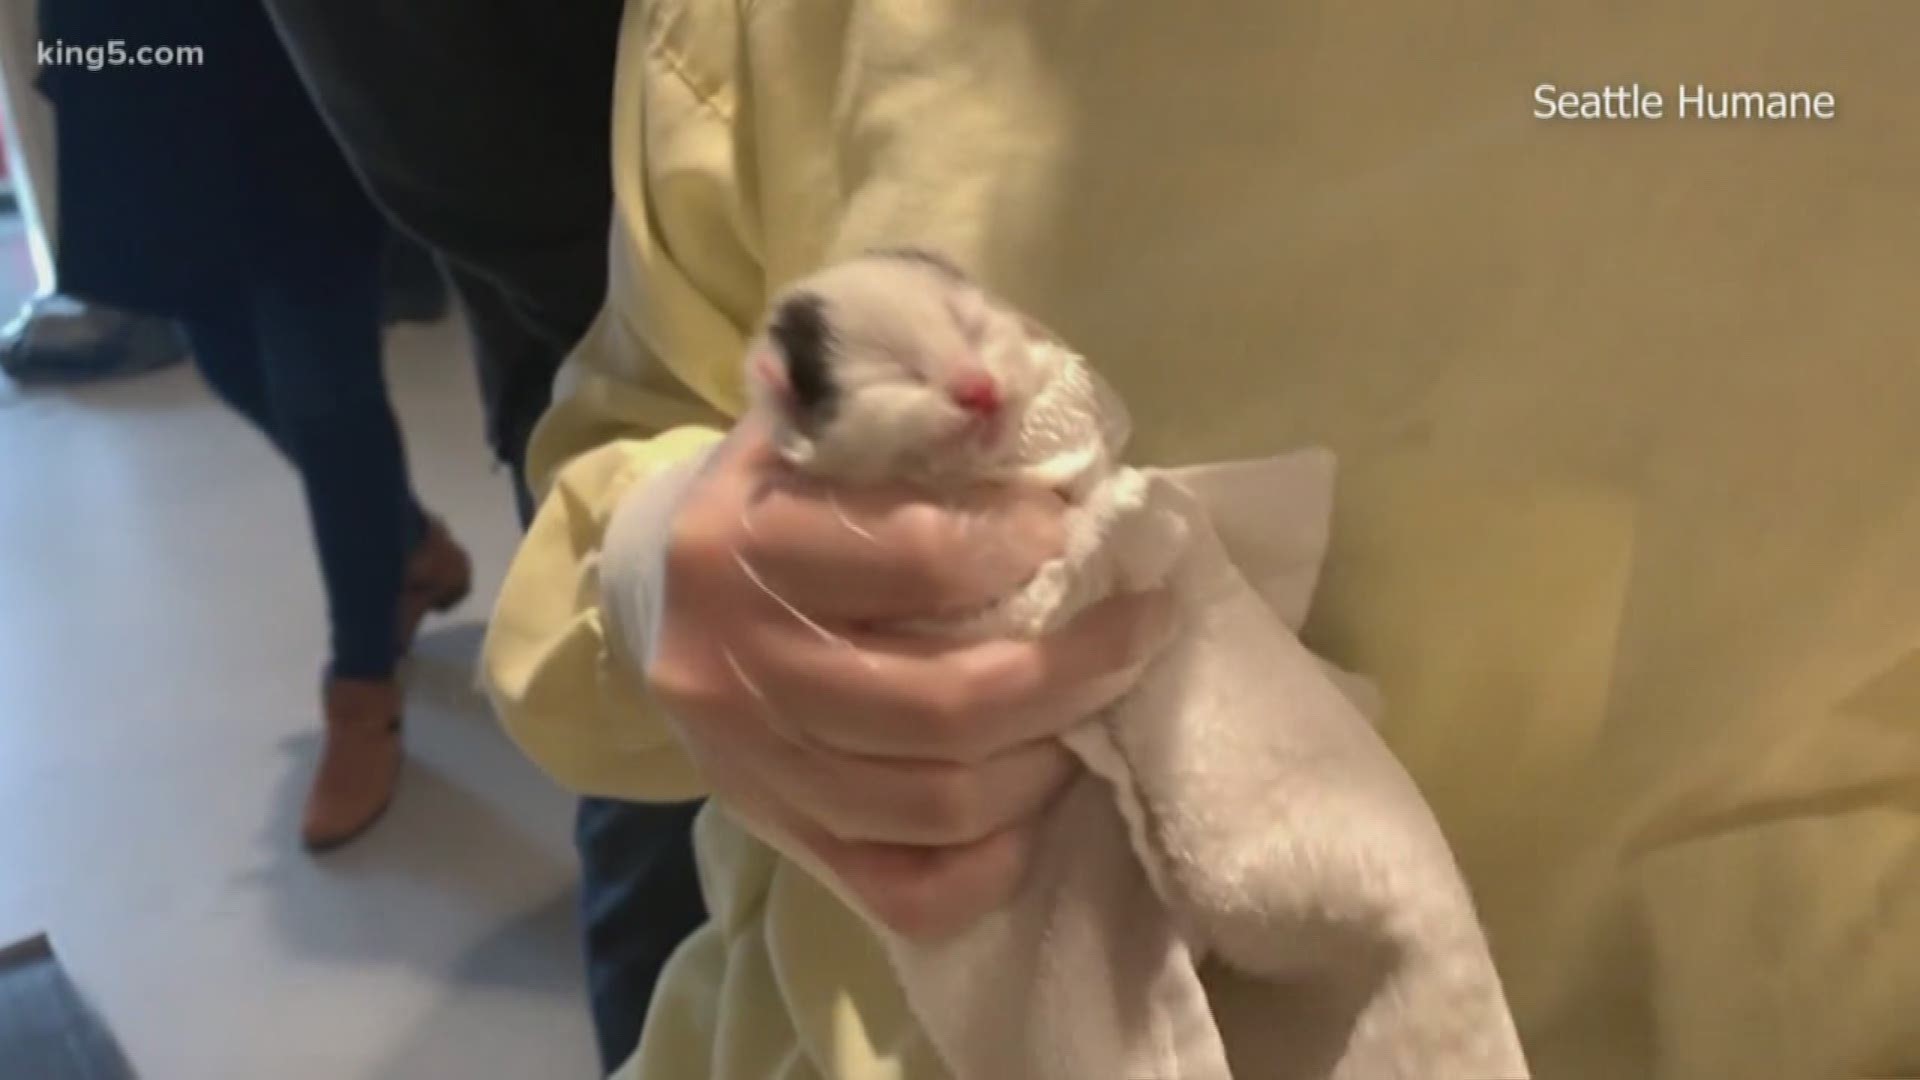 Someone abandoned five newborn kittens in a bag along I-90 in King County on Tuesday. They were taken to Seattle Humane and are being tended to by foster families. KING 5's Tony Black reports.